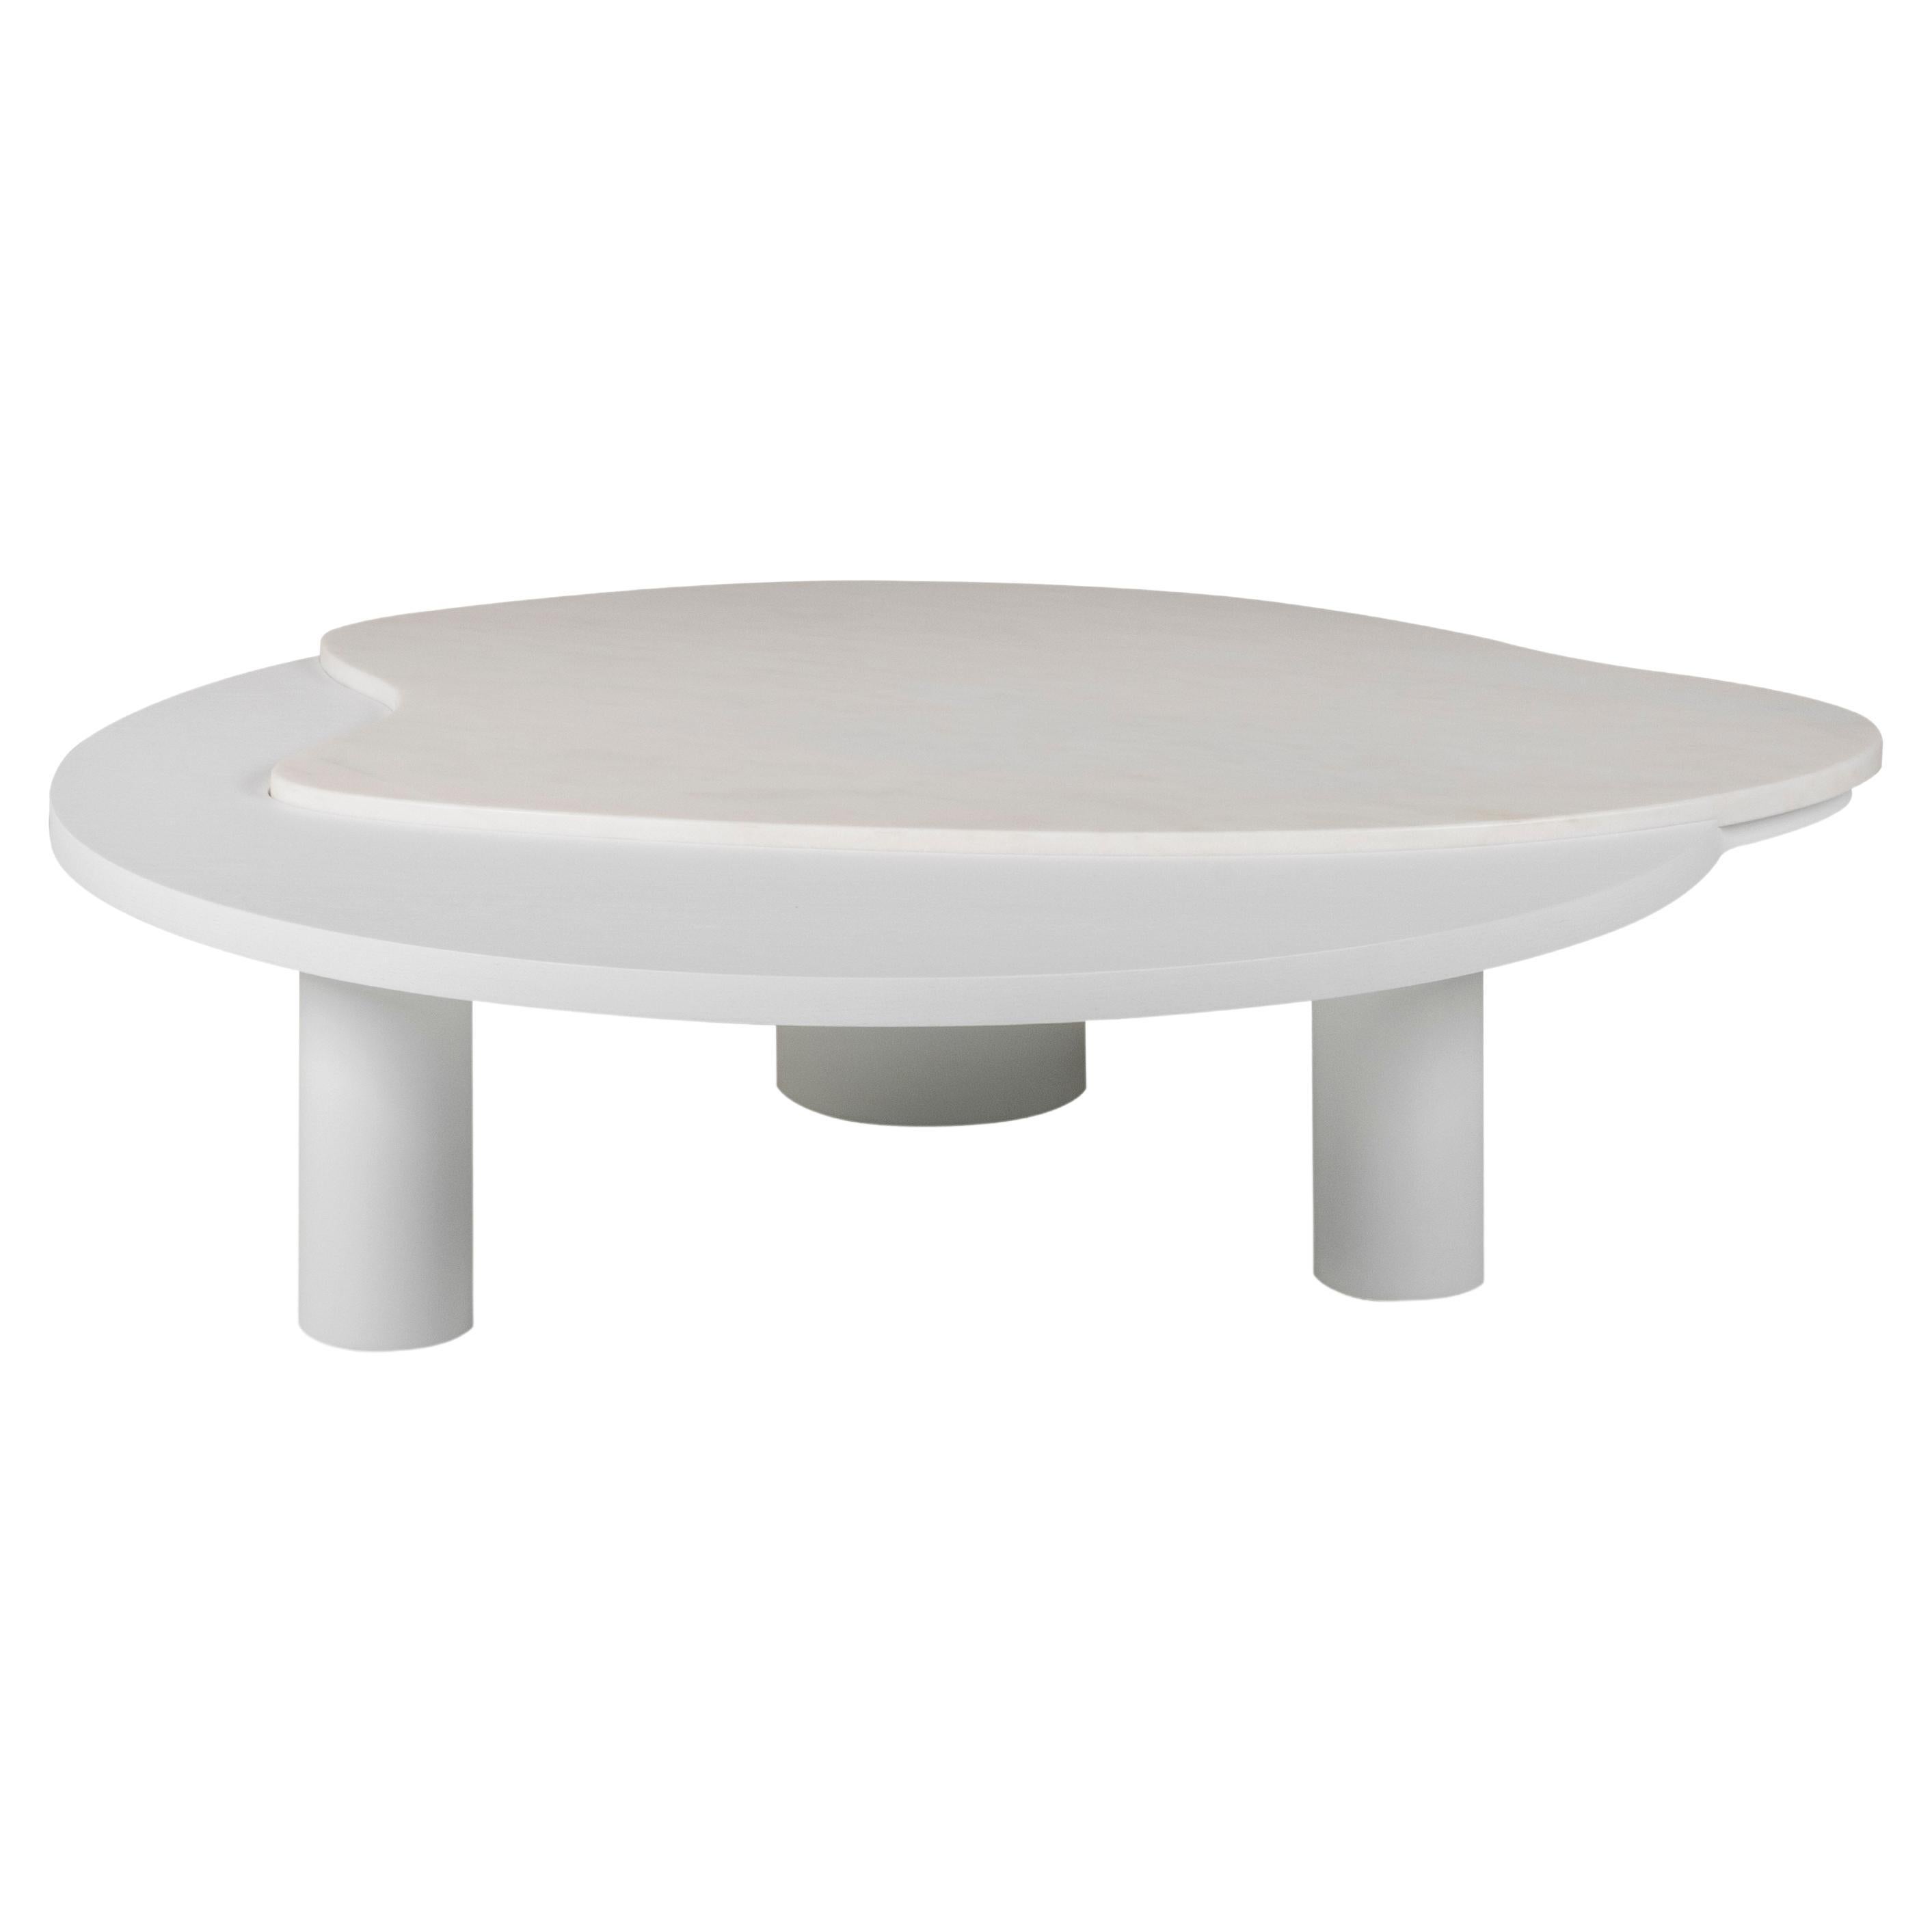 Portuguese Organic Modern Bordeira Coffee Table, Marble, Handmade in Portugal by Greenapple For Sale